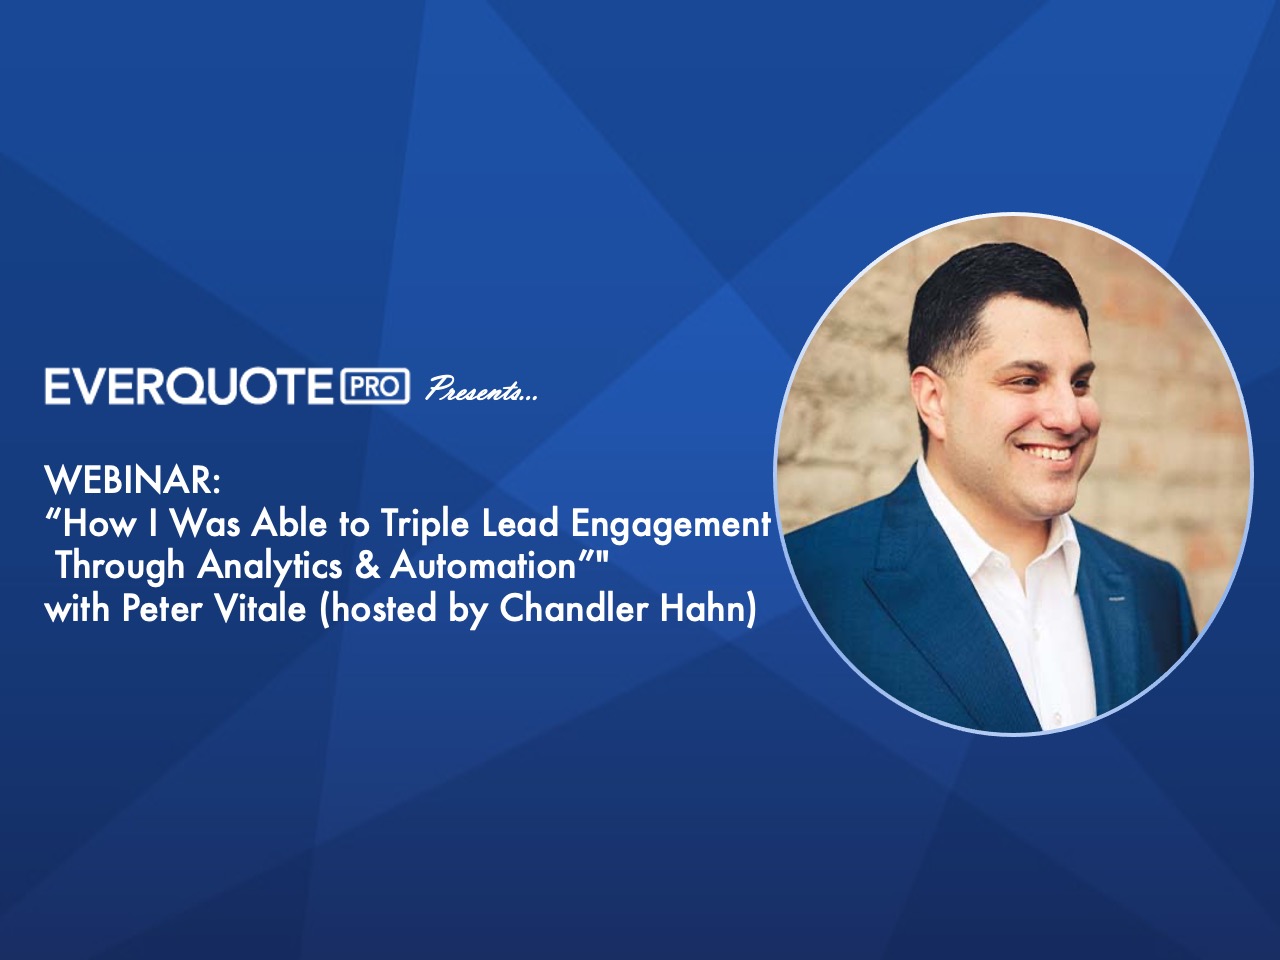 How I Was Able to Triple Lead Engagement Through Analytics & Automation with Peter Vitale